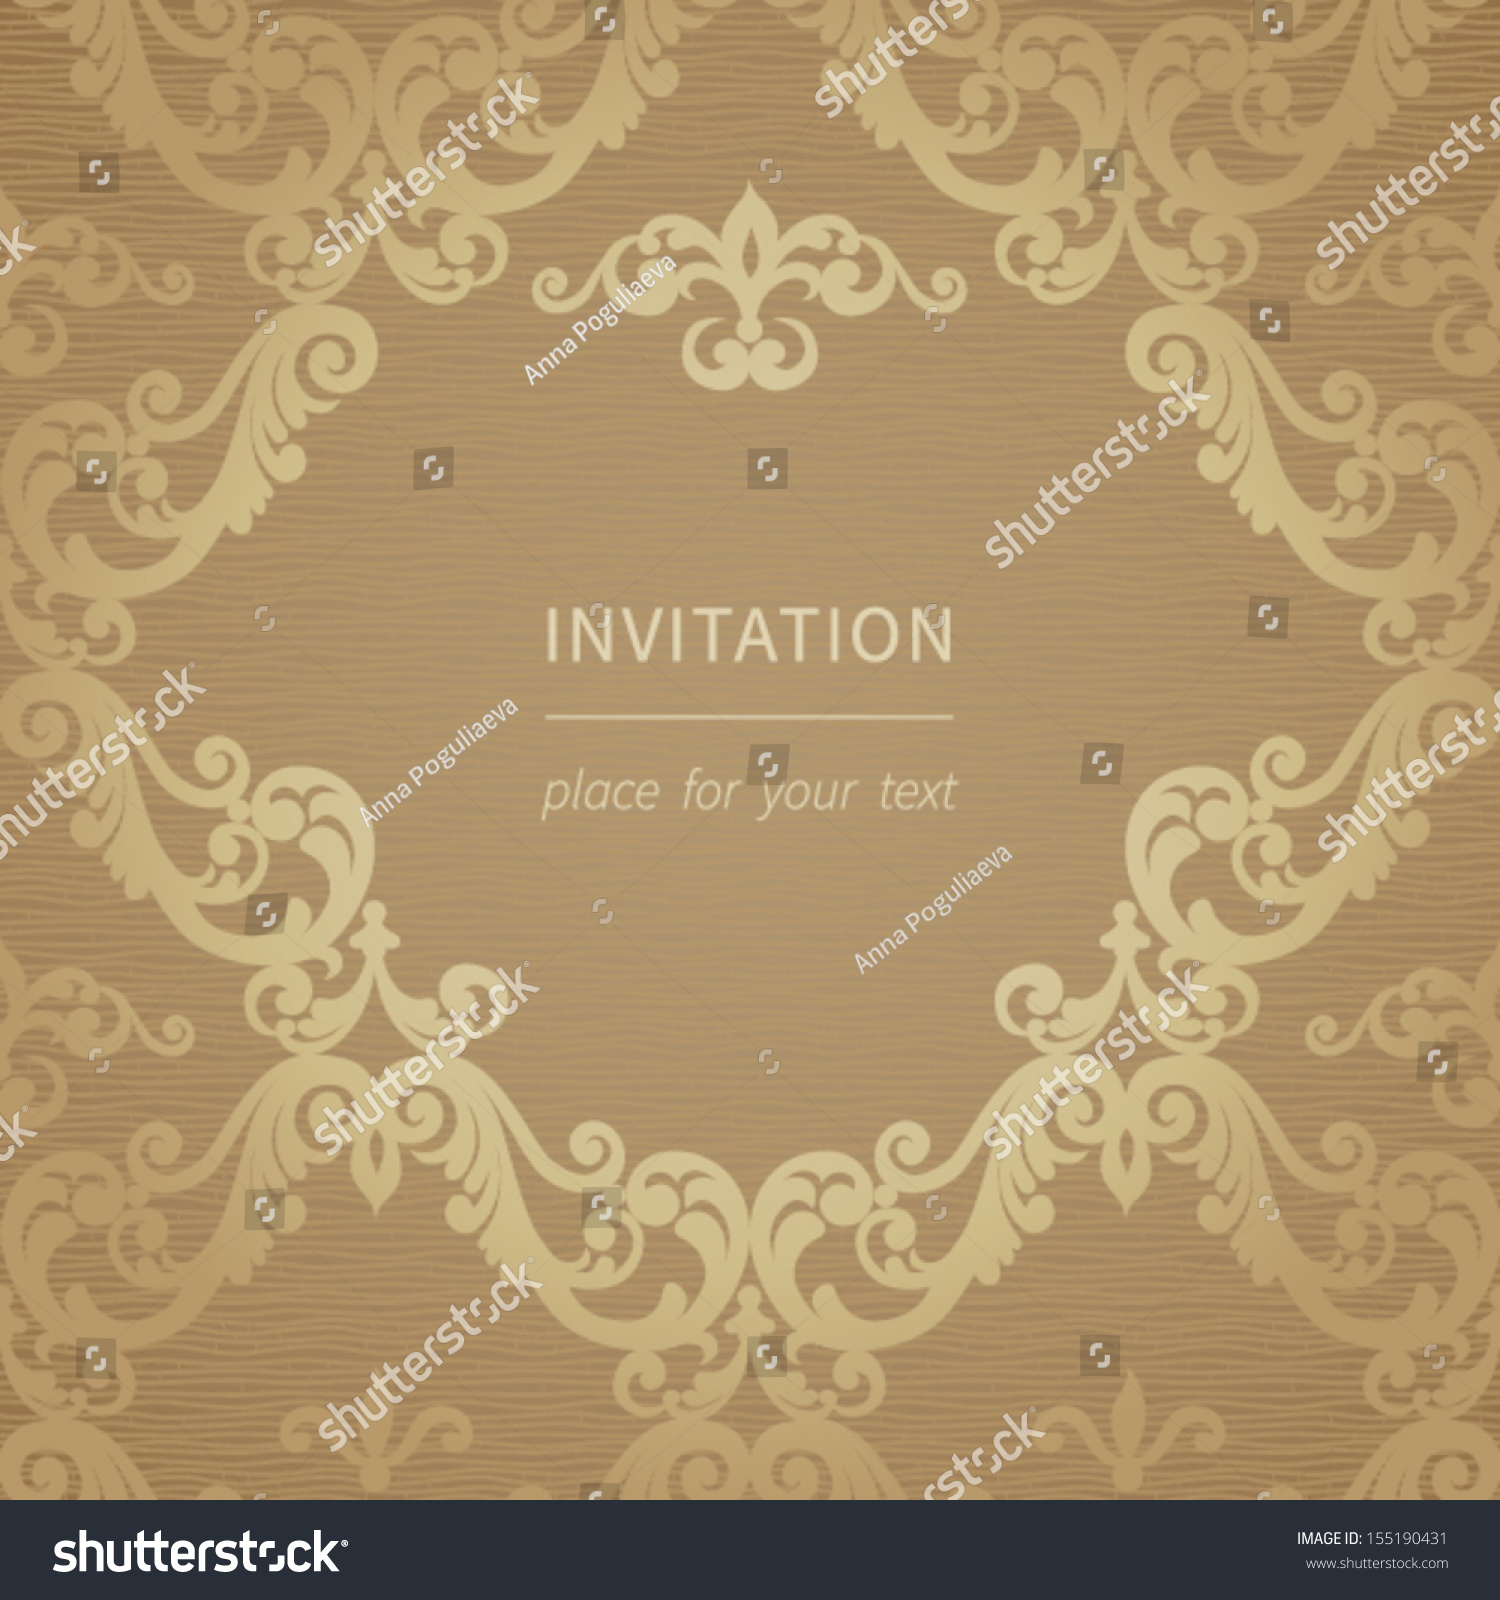 Vintage greeting card with swirls and floral motifs in retro style. Template frame design for card and cover. Vector border in Victorian style. You can place your text in the empty frame. #155190431